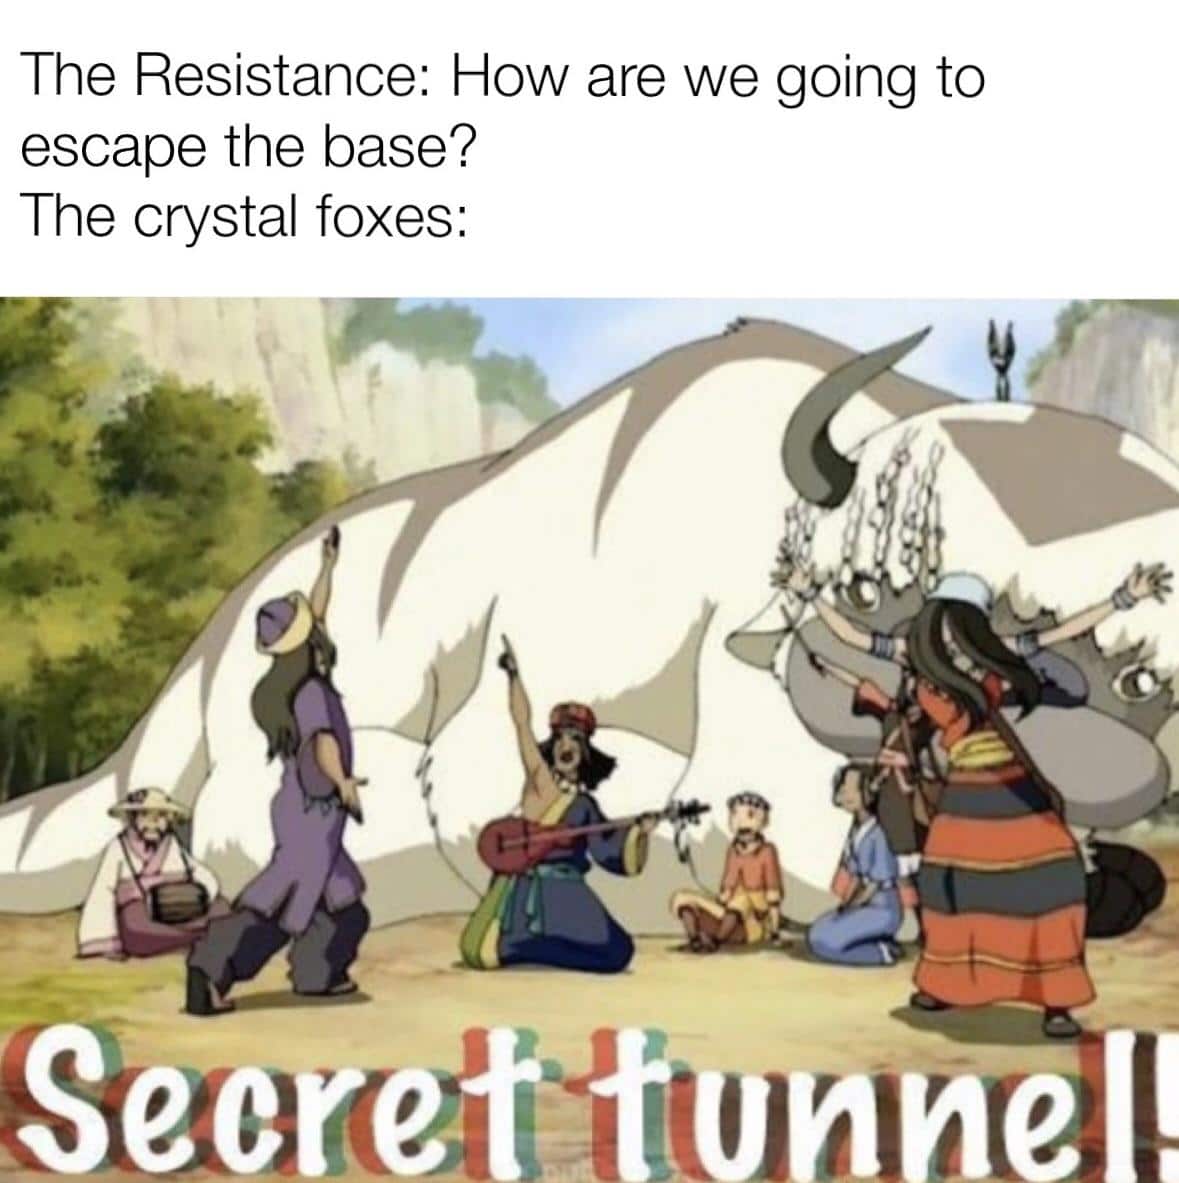 Sequel-memes,  Star Wars Memes Sequel-memes,  text: The Resistance: How are we going to escape the base? The crystal foxes: SecreWfUnneIl 